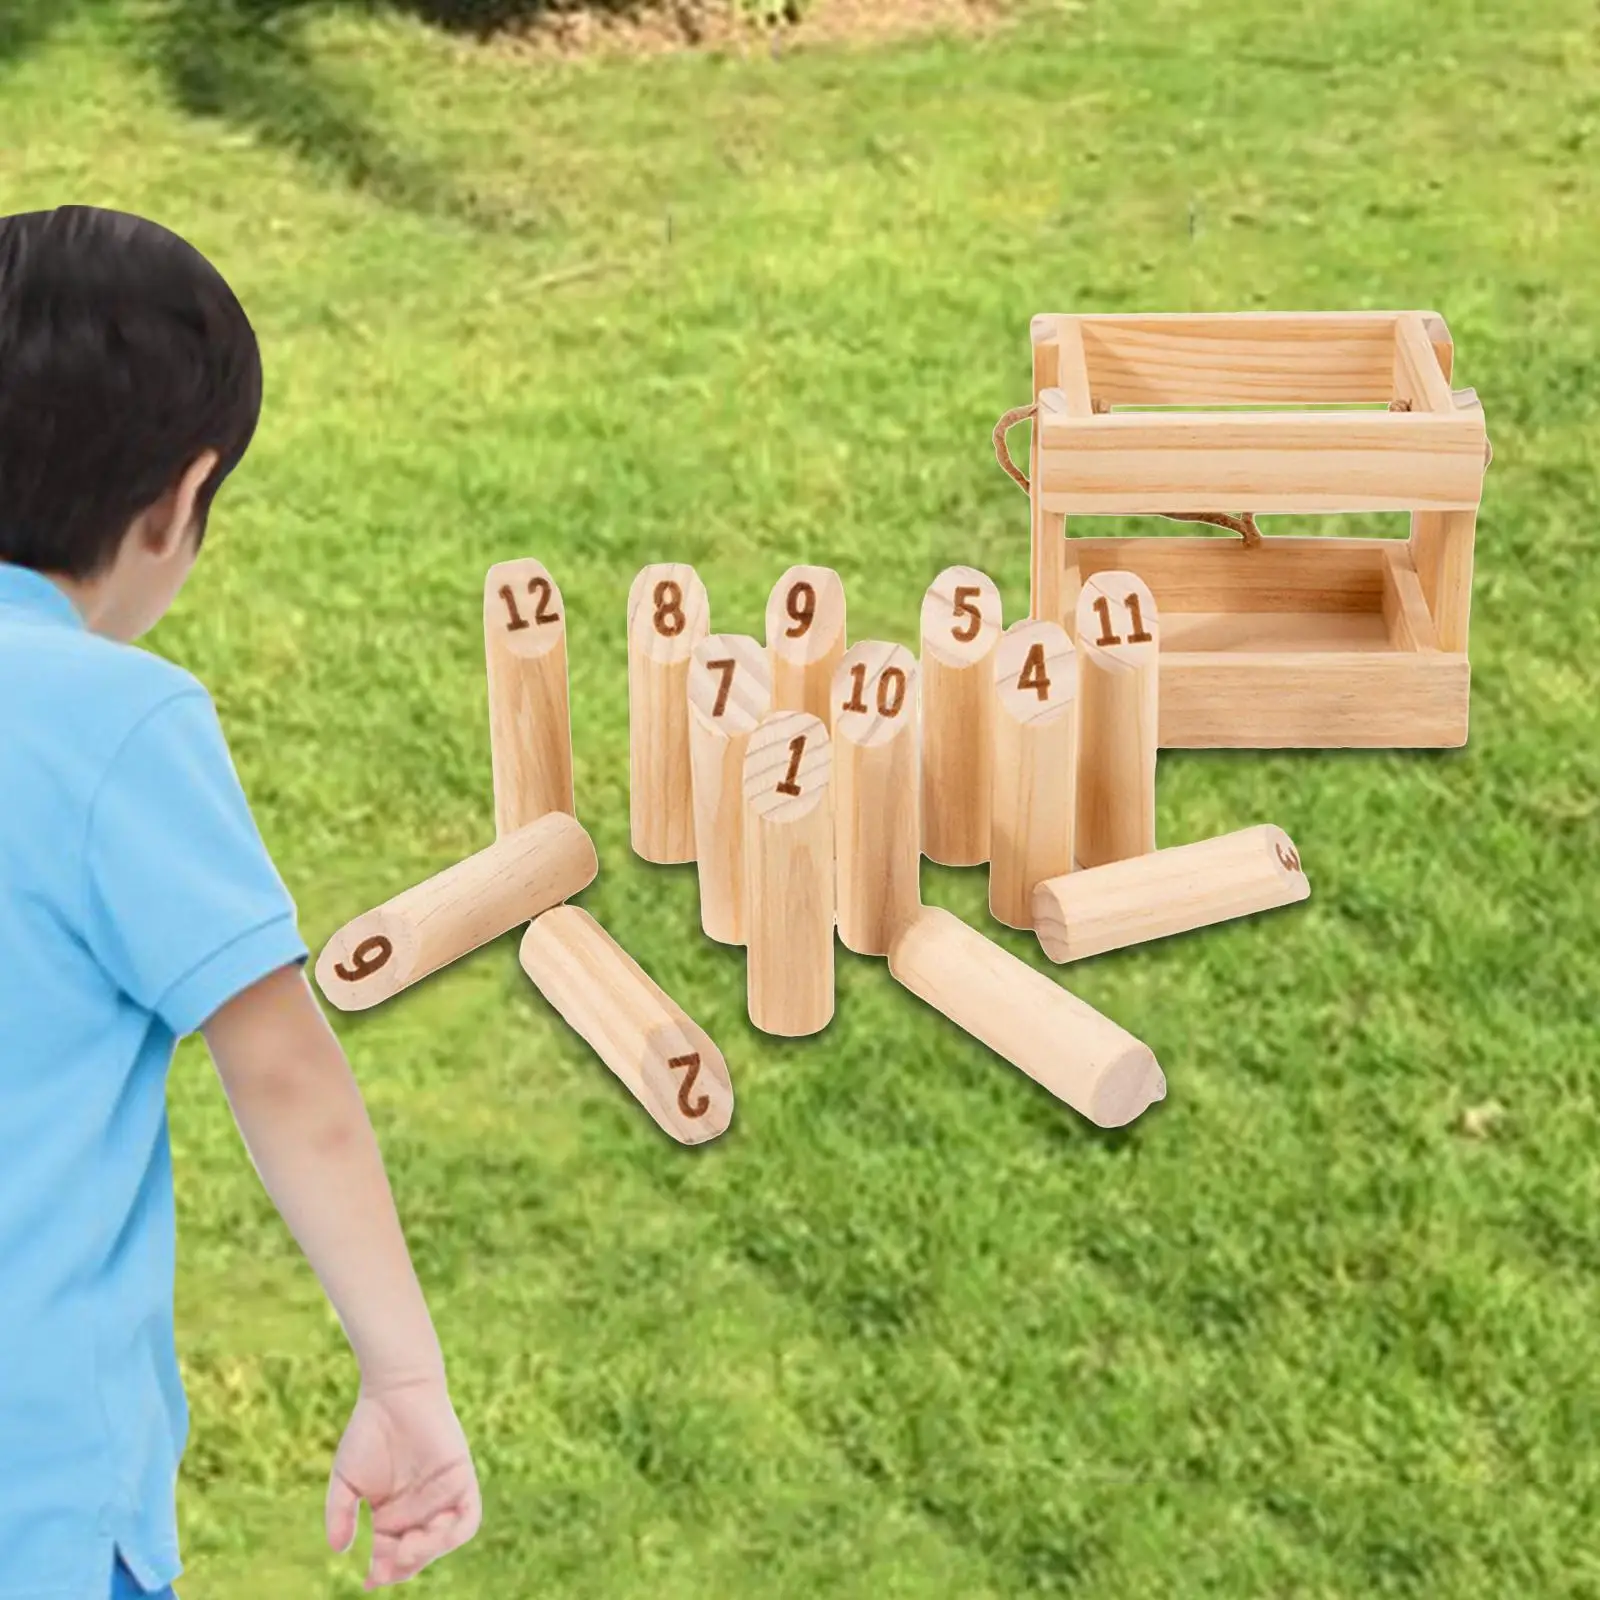 

Wooden Tossing Game 12 Pcs Numbered Pins Throwing Scatter with Storage Basket for Backyard Lawn All Ages Family Kids